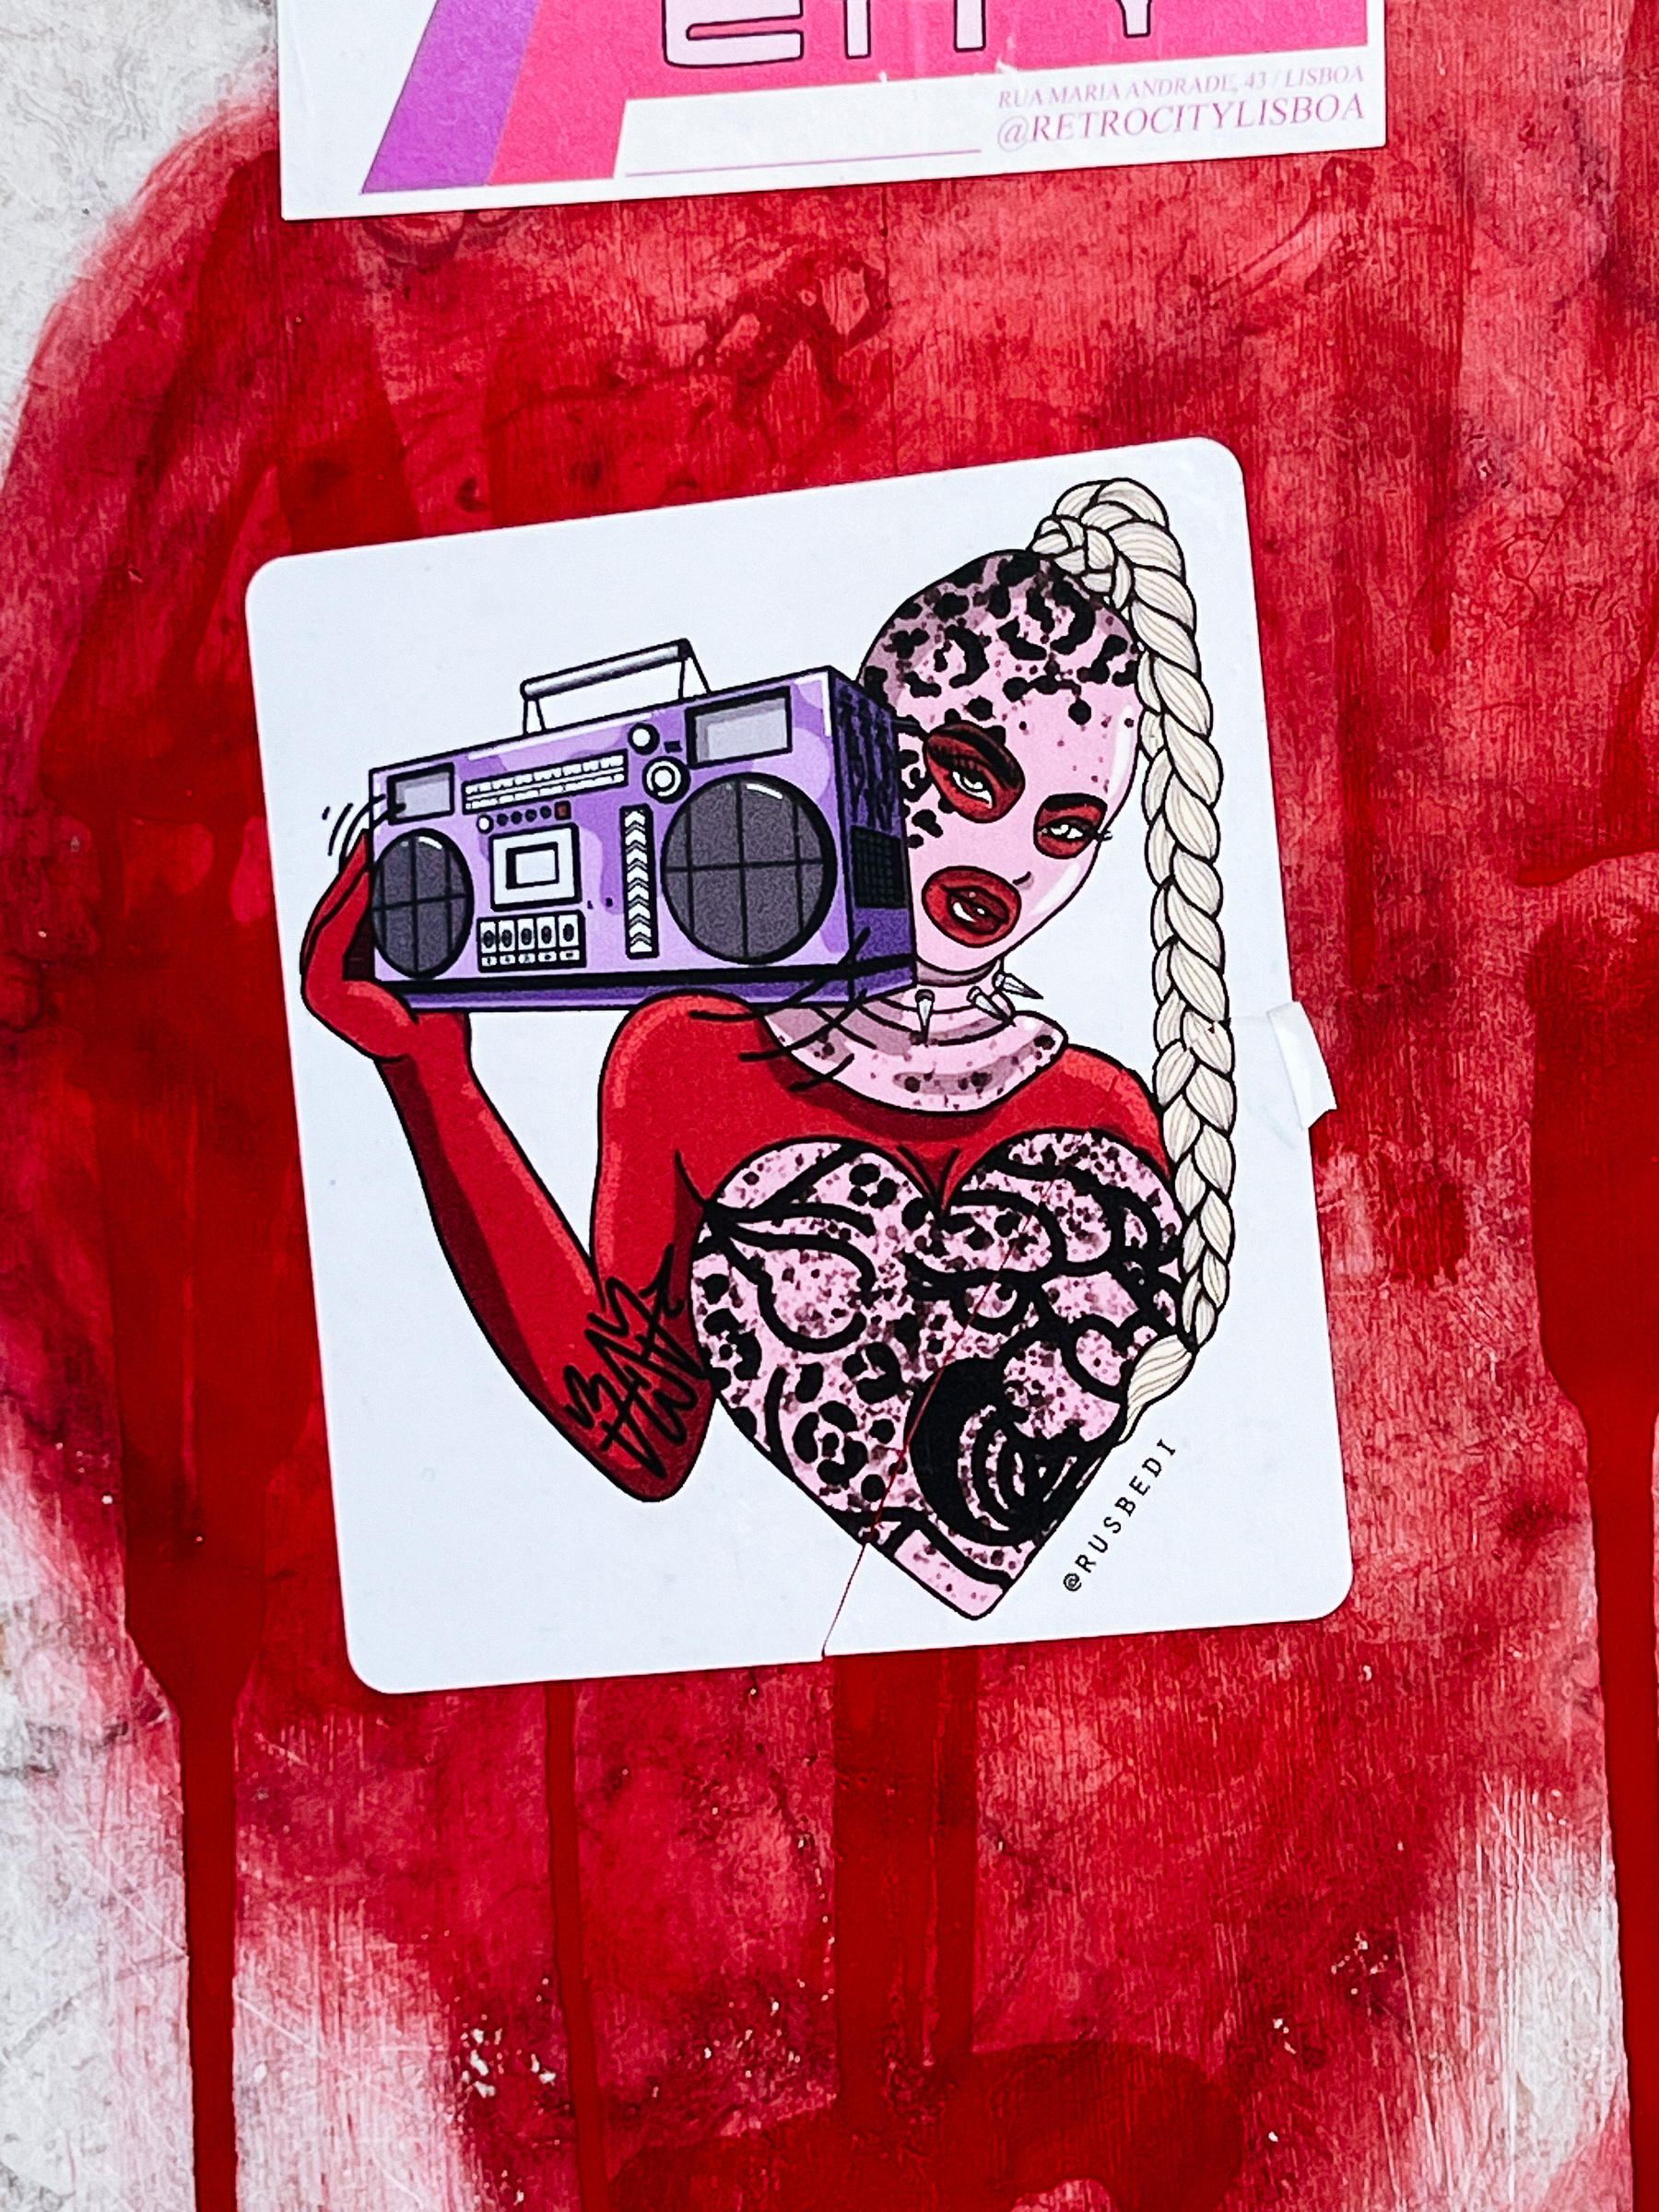 Sticker with a drawing, showing a girl with a pink balaclava, holding a boom box, wearing a red outfit with a heart. 